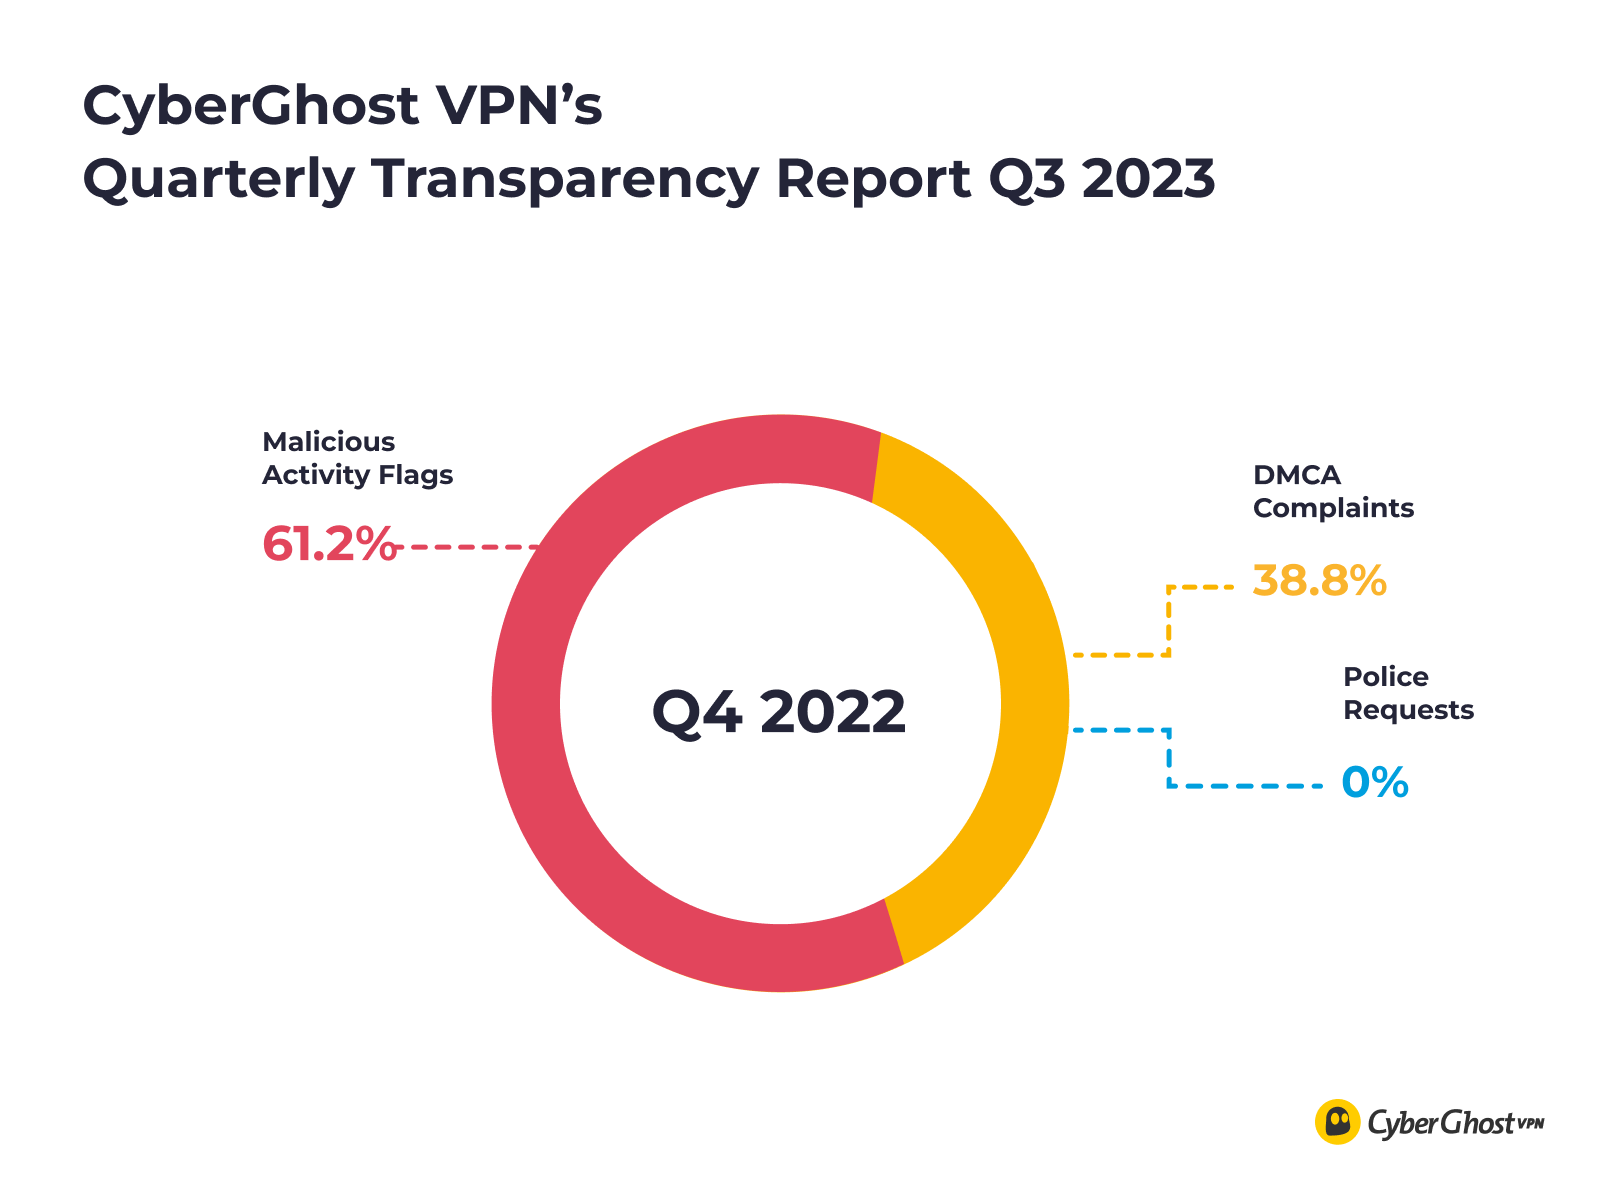 CyberGhost VPN's Quarterly Transparency Report numbers for Q3 2023